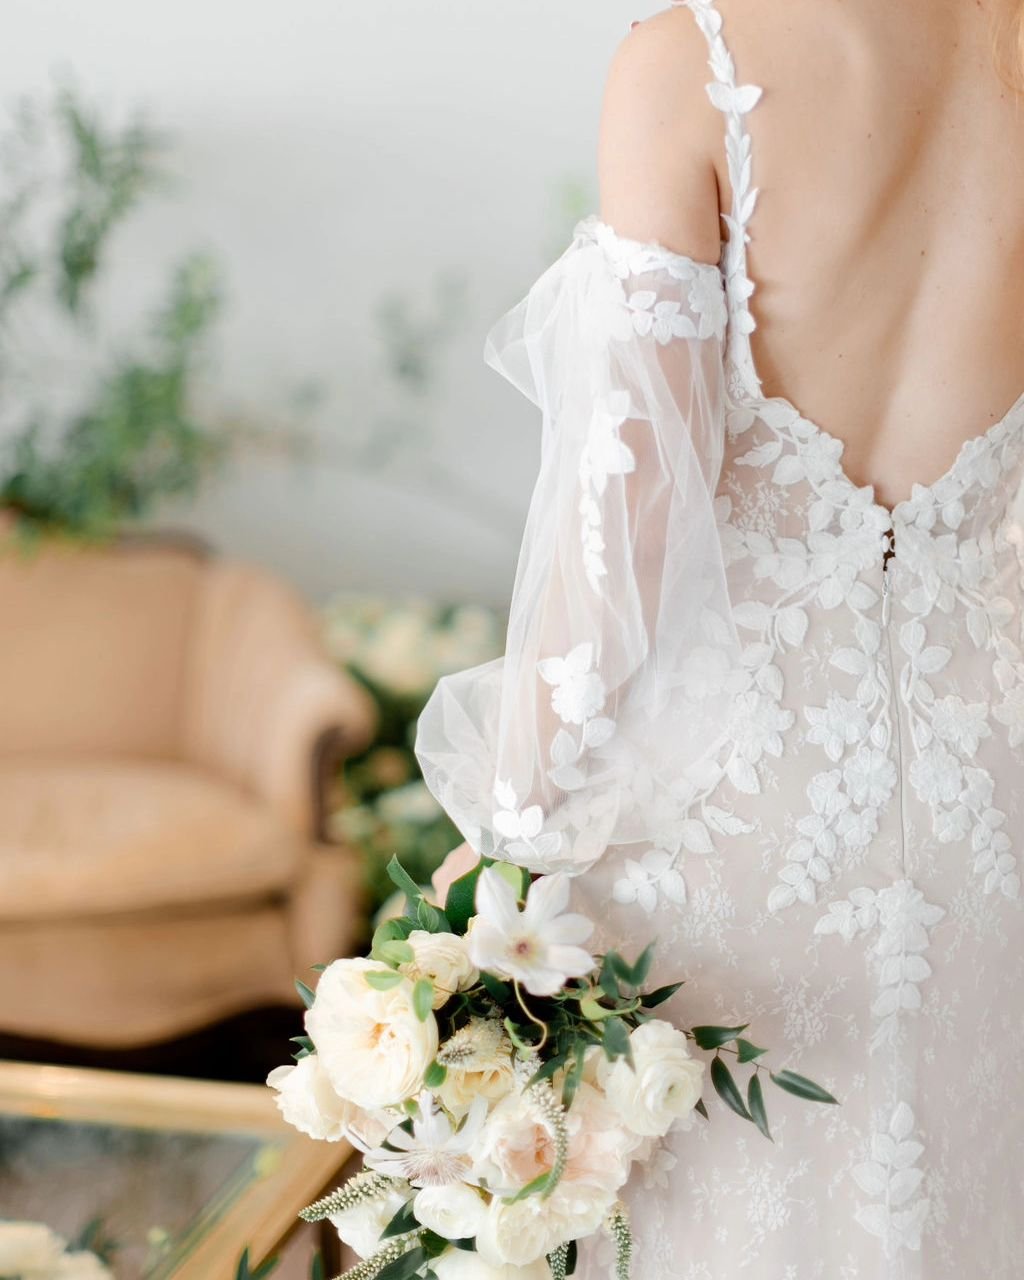 Every bride dreams of her wedding day look, knowing it's a reflection of her unique style and personality.

For my brides, it's not just about finding the perfect dress or hairstyle; it's about capturing the essence of who they are and how they want 